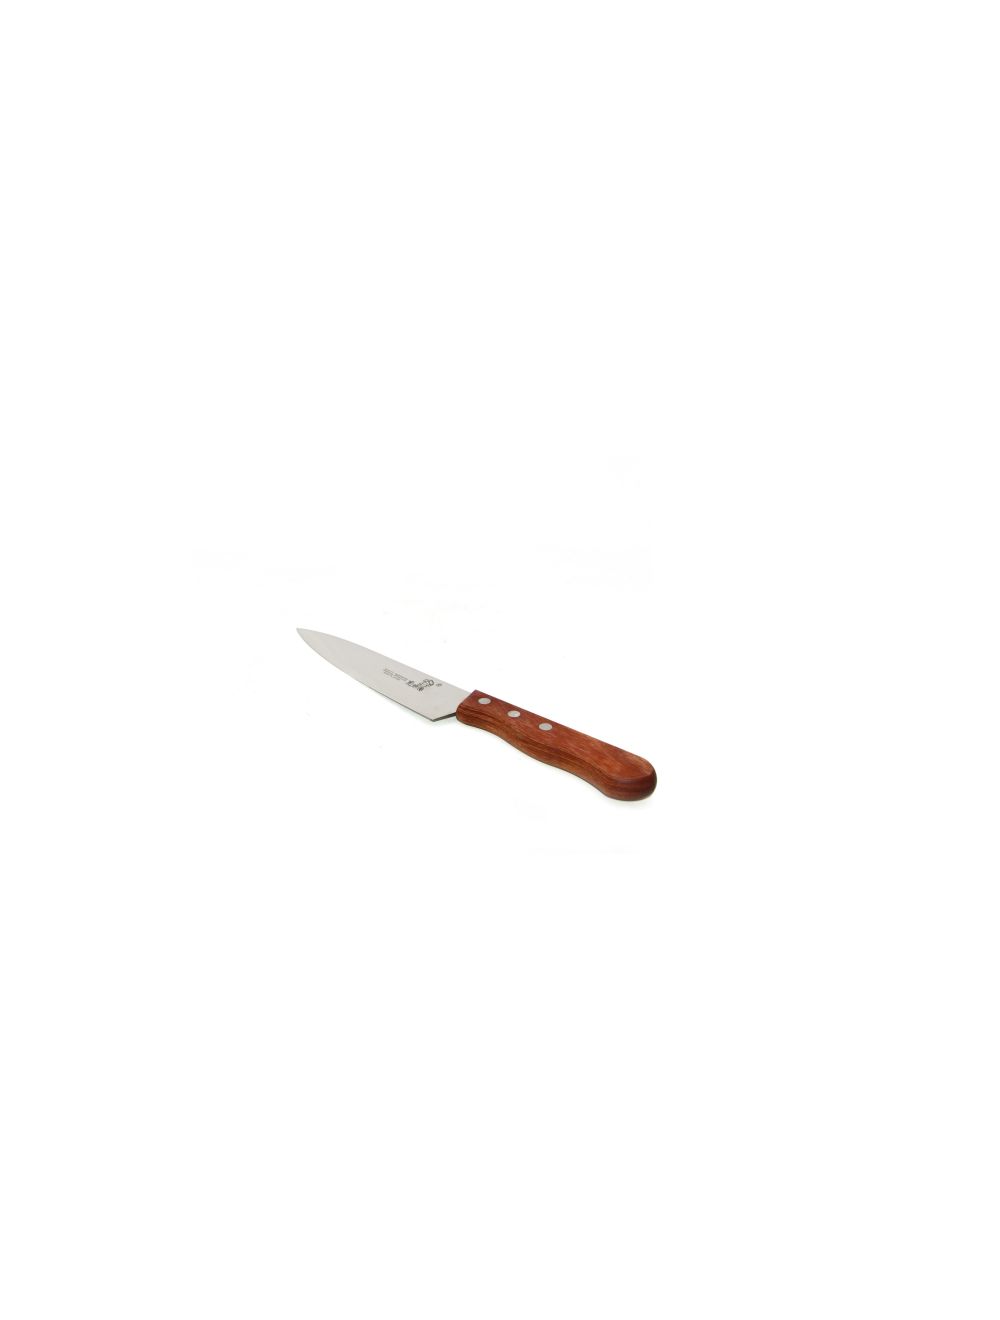 News Corporation Cook Knife 6 Inch